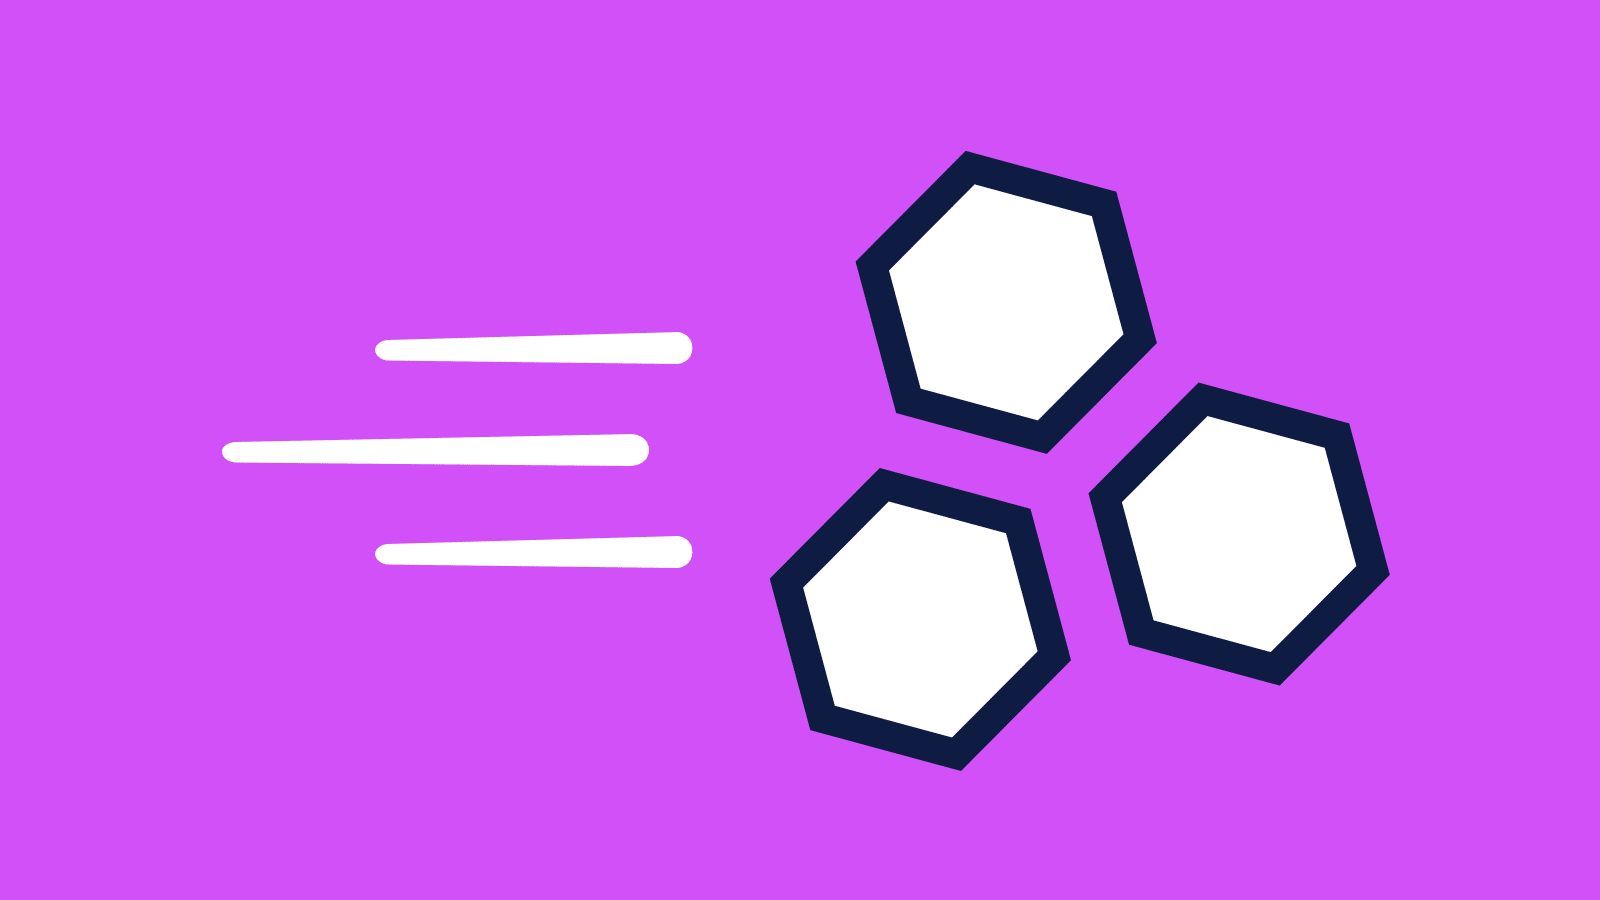 Three white hexagons representing components with speed trails behind them on a purple background.